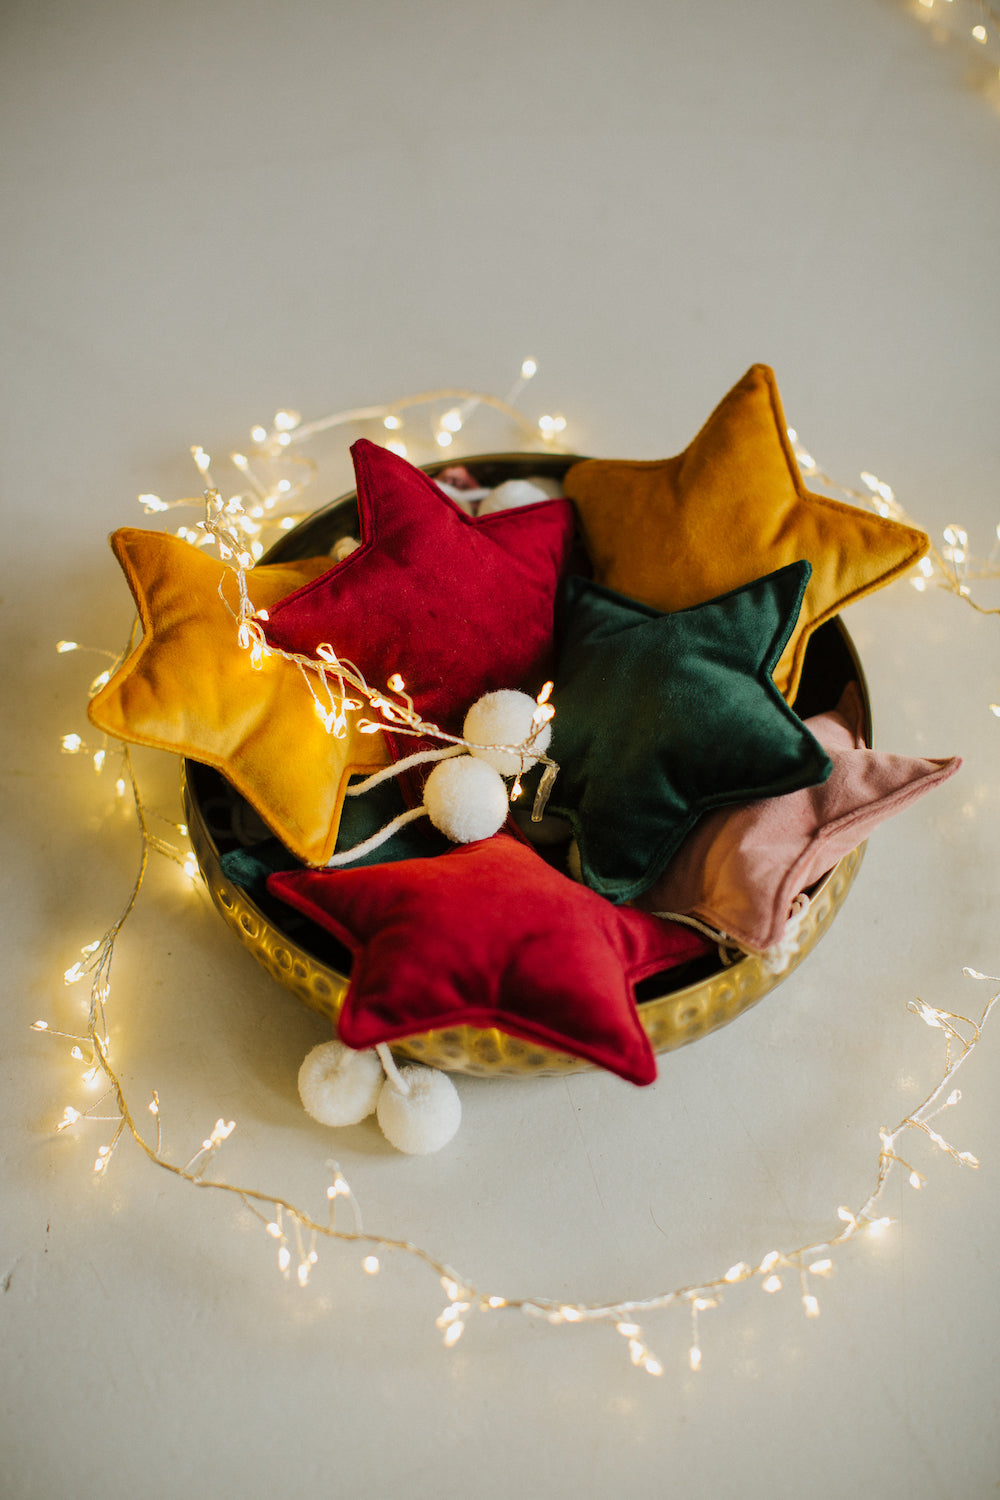 velvet little star pendant green by bettys home with yellow star, wine star pendant in basket and christmas lights